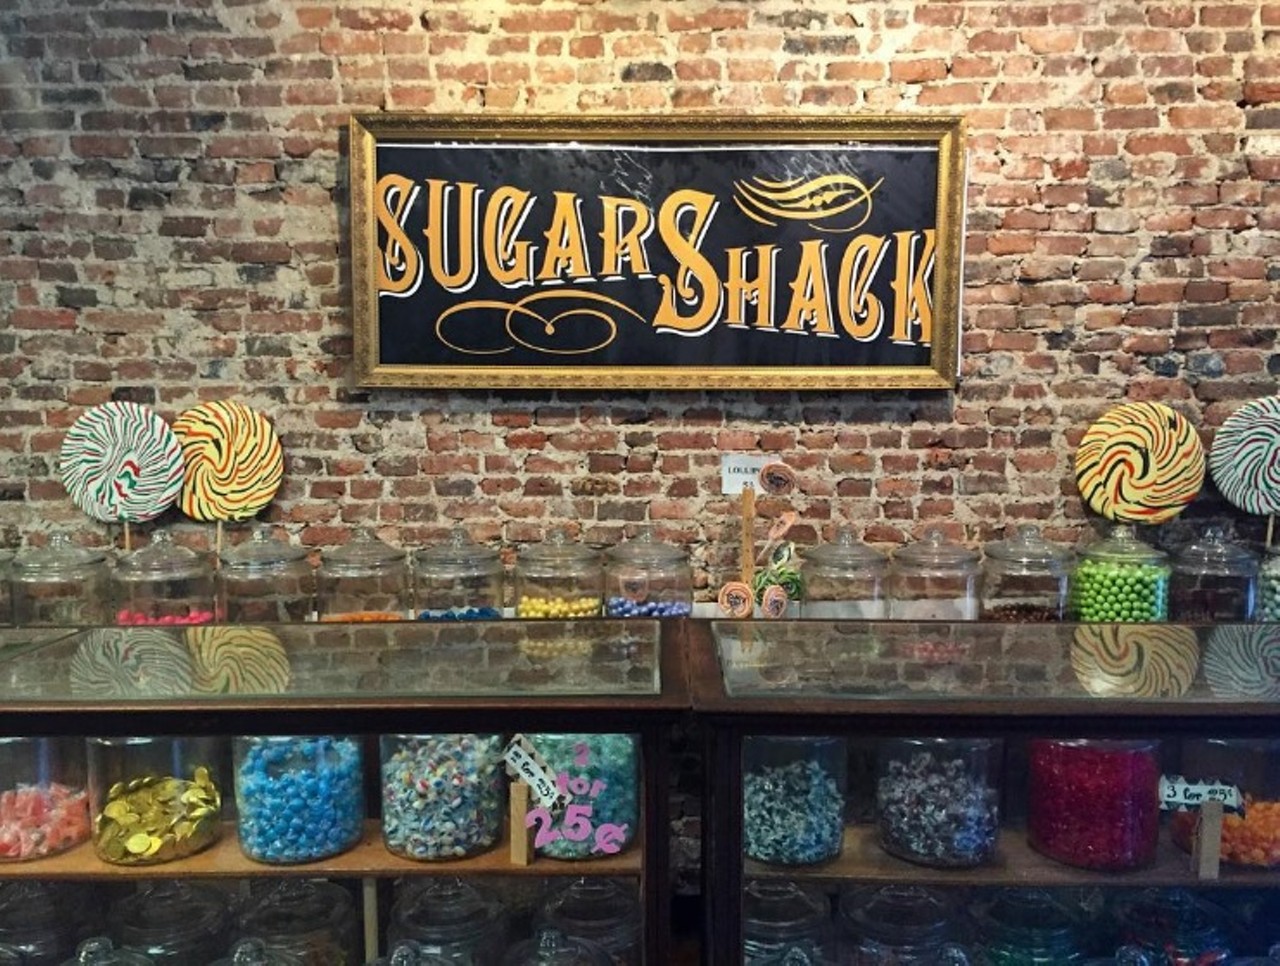 Sugar Shack
151 W Argonne Dr.
St. Louis, MO 63122
(314) 966-0065
This old-school candy shop offers nostalgic candies, ice cream sodas and gourmet cotton candy. The shop will even host your kid's birthday party...just don't blame us if they're all hyper by the end. Photo courtesy of Instagram / hannahforsythe.